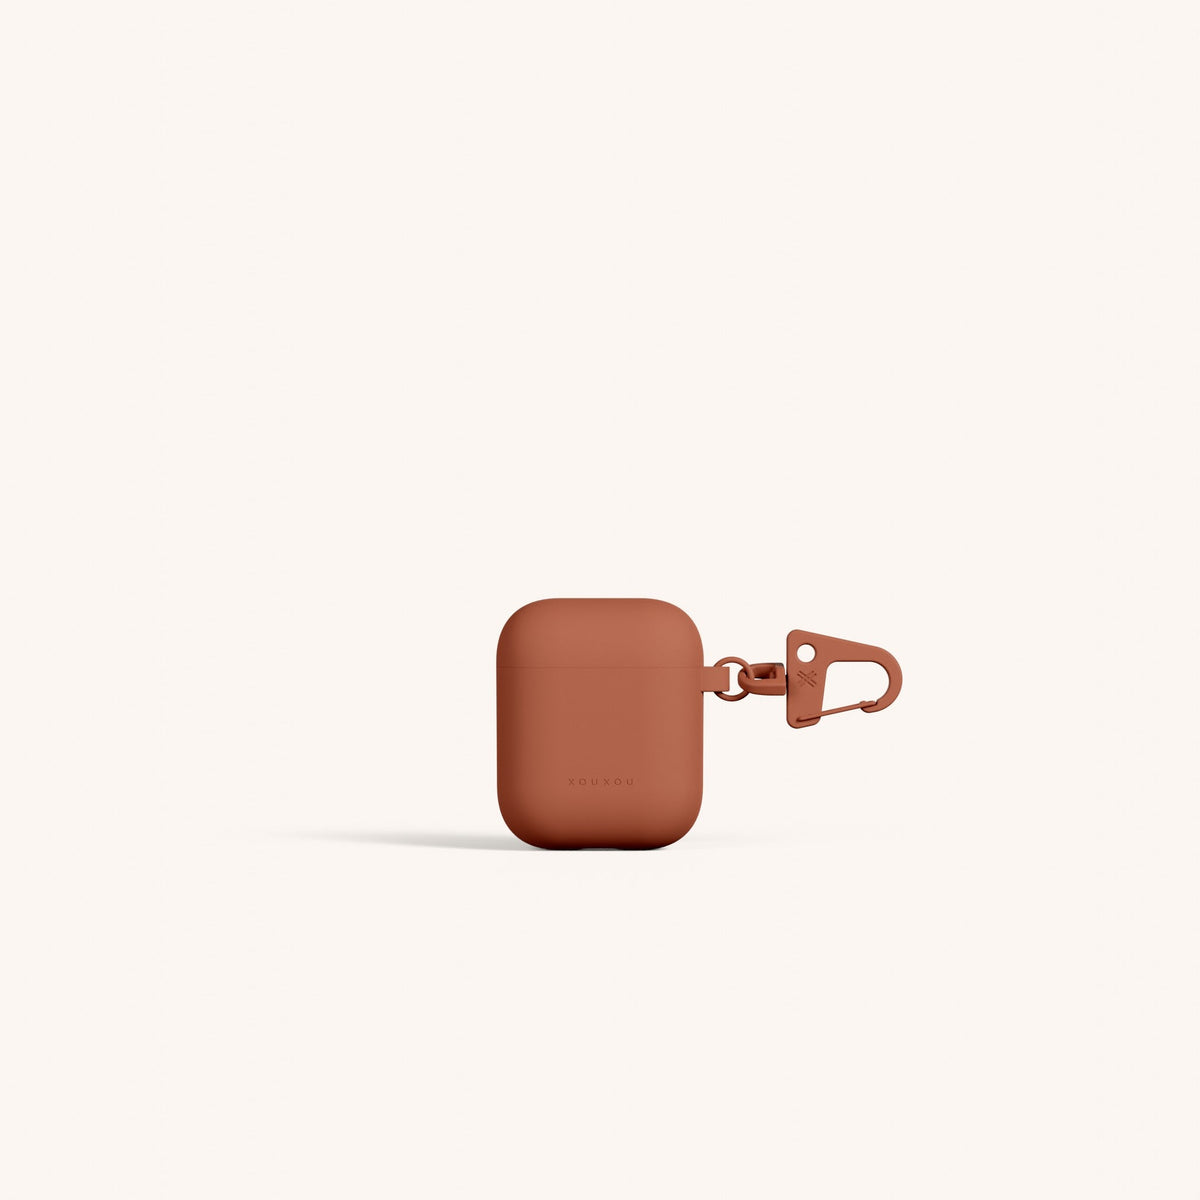 AirPods Case for AirPods 1st / 2nd Generation in Rusty Red Total View | XOUXOU #airpods model_1st / 2nd gen